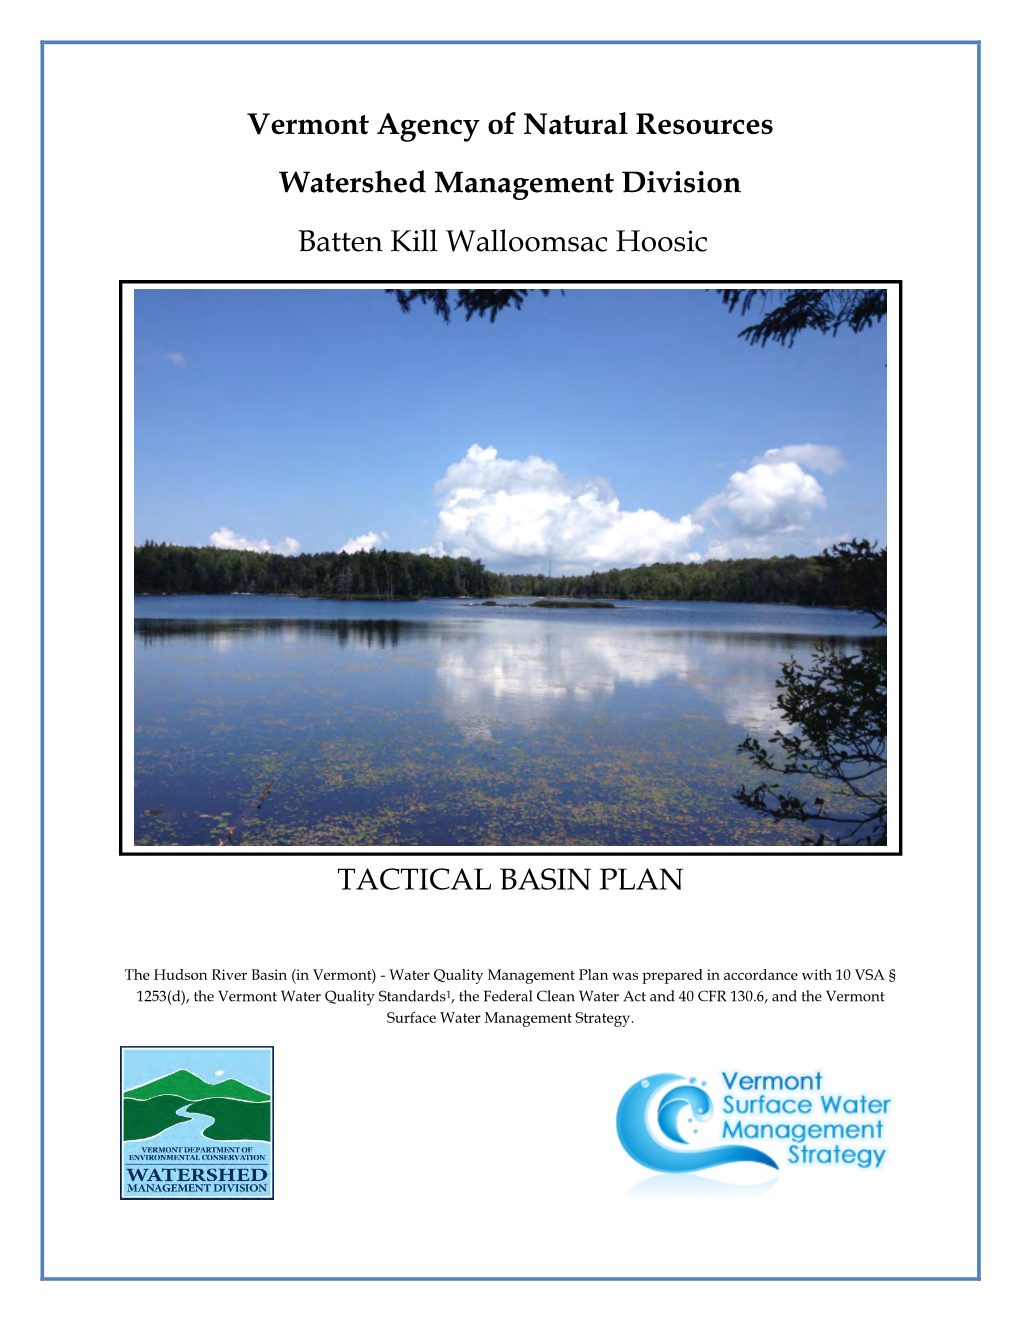 Vermont Agency of Natural Resources Watershed Management Division Batten Kill Walloomsac Hoosic